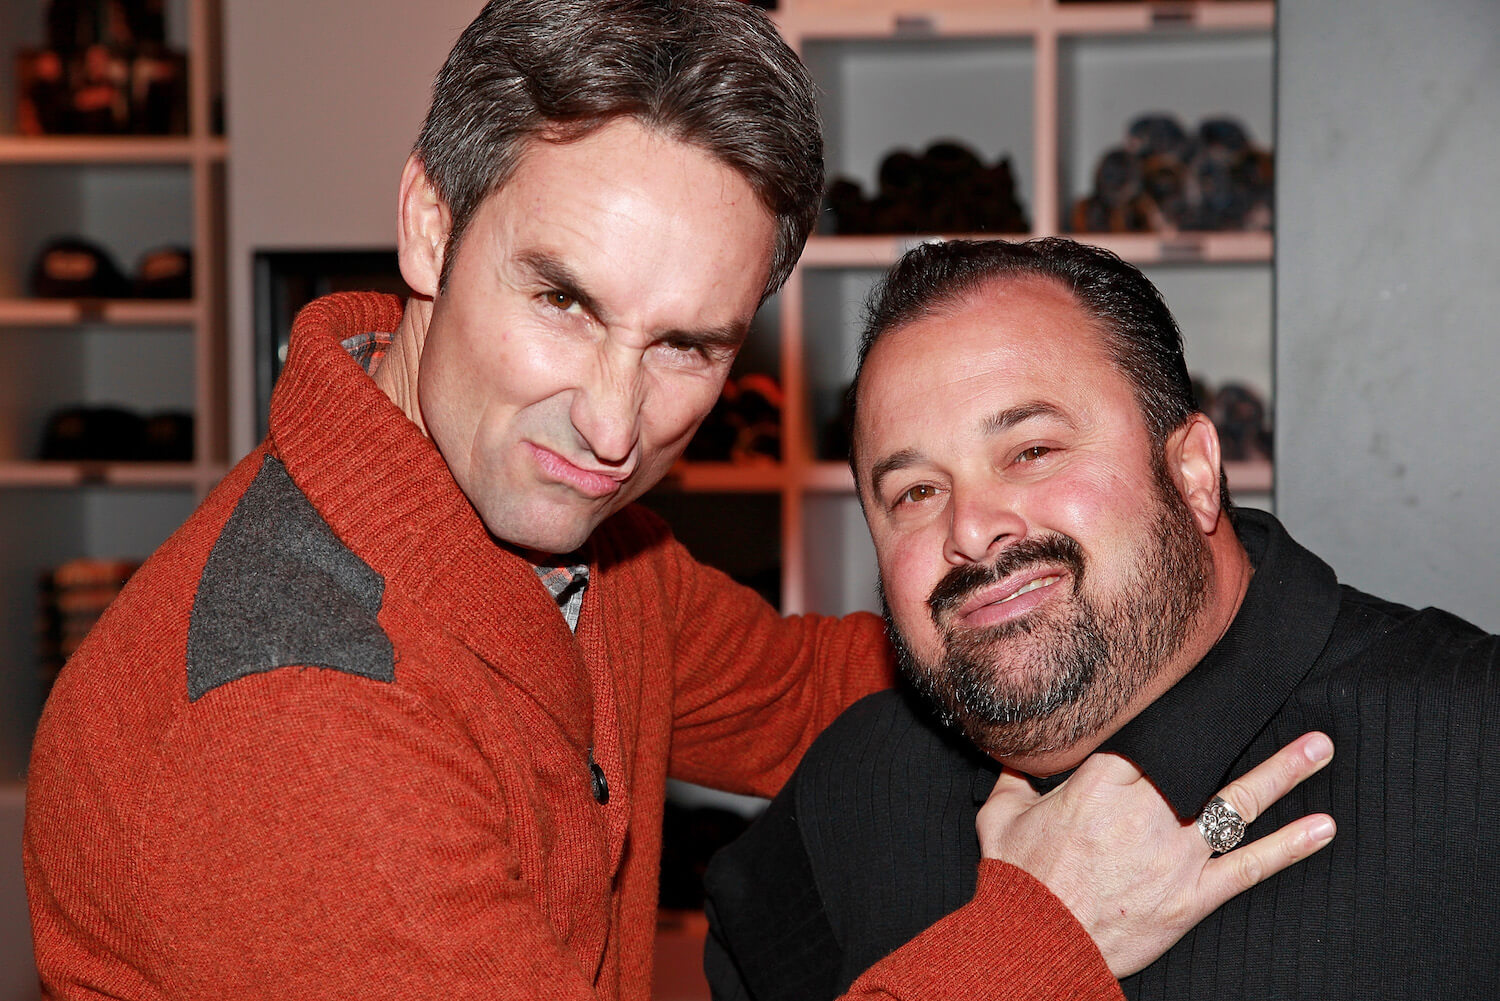 'American Pickers' star Mike Wolfe playfully putting his hands around Frank Fritz's neck